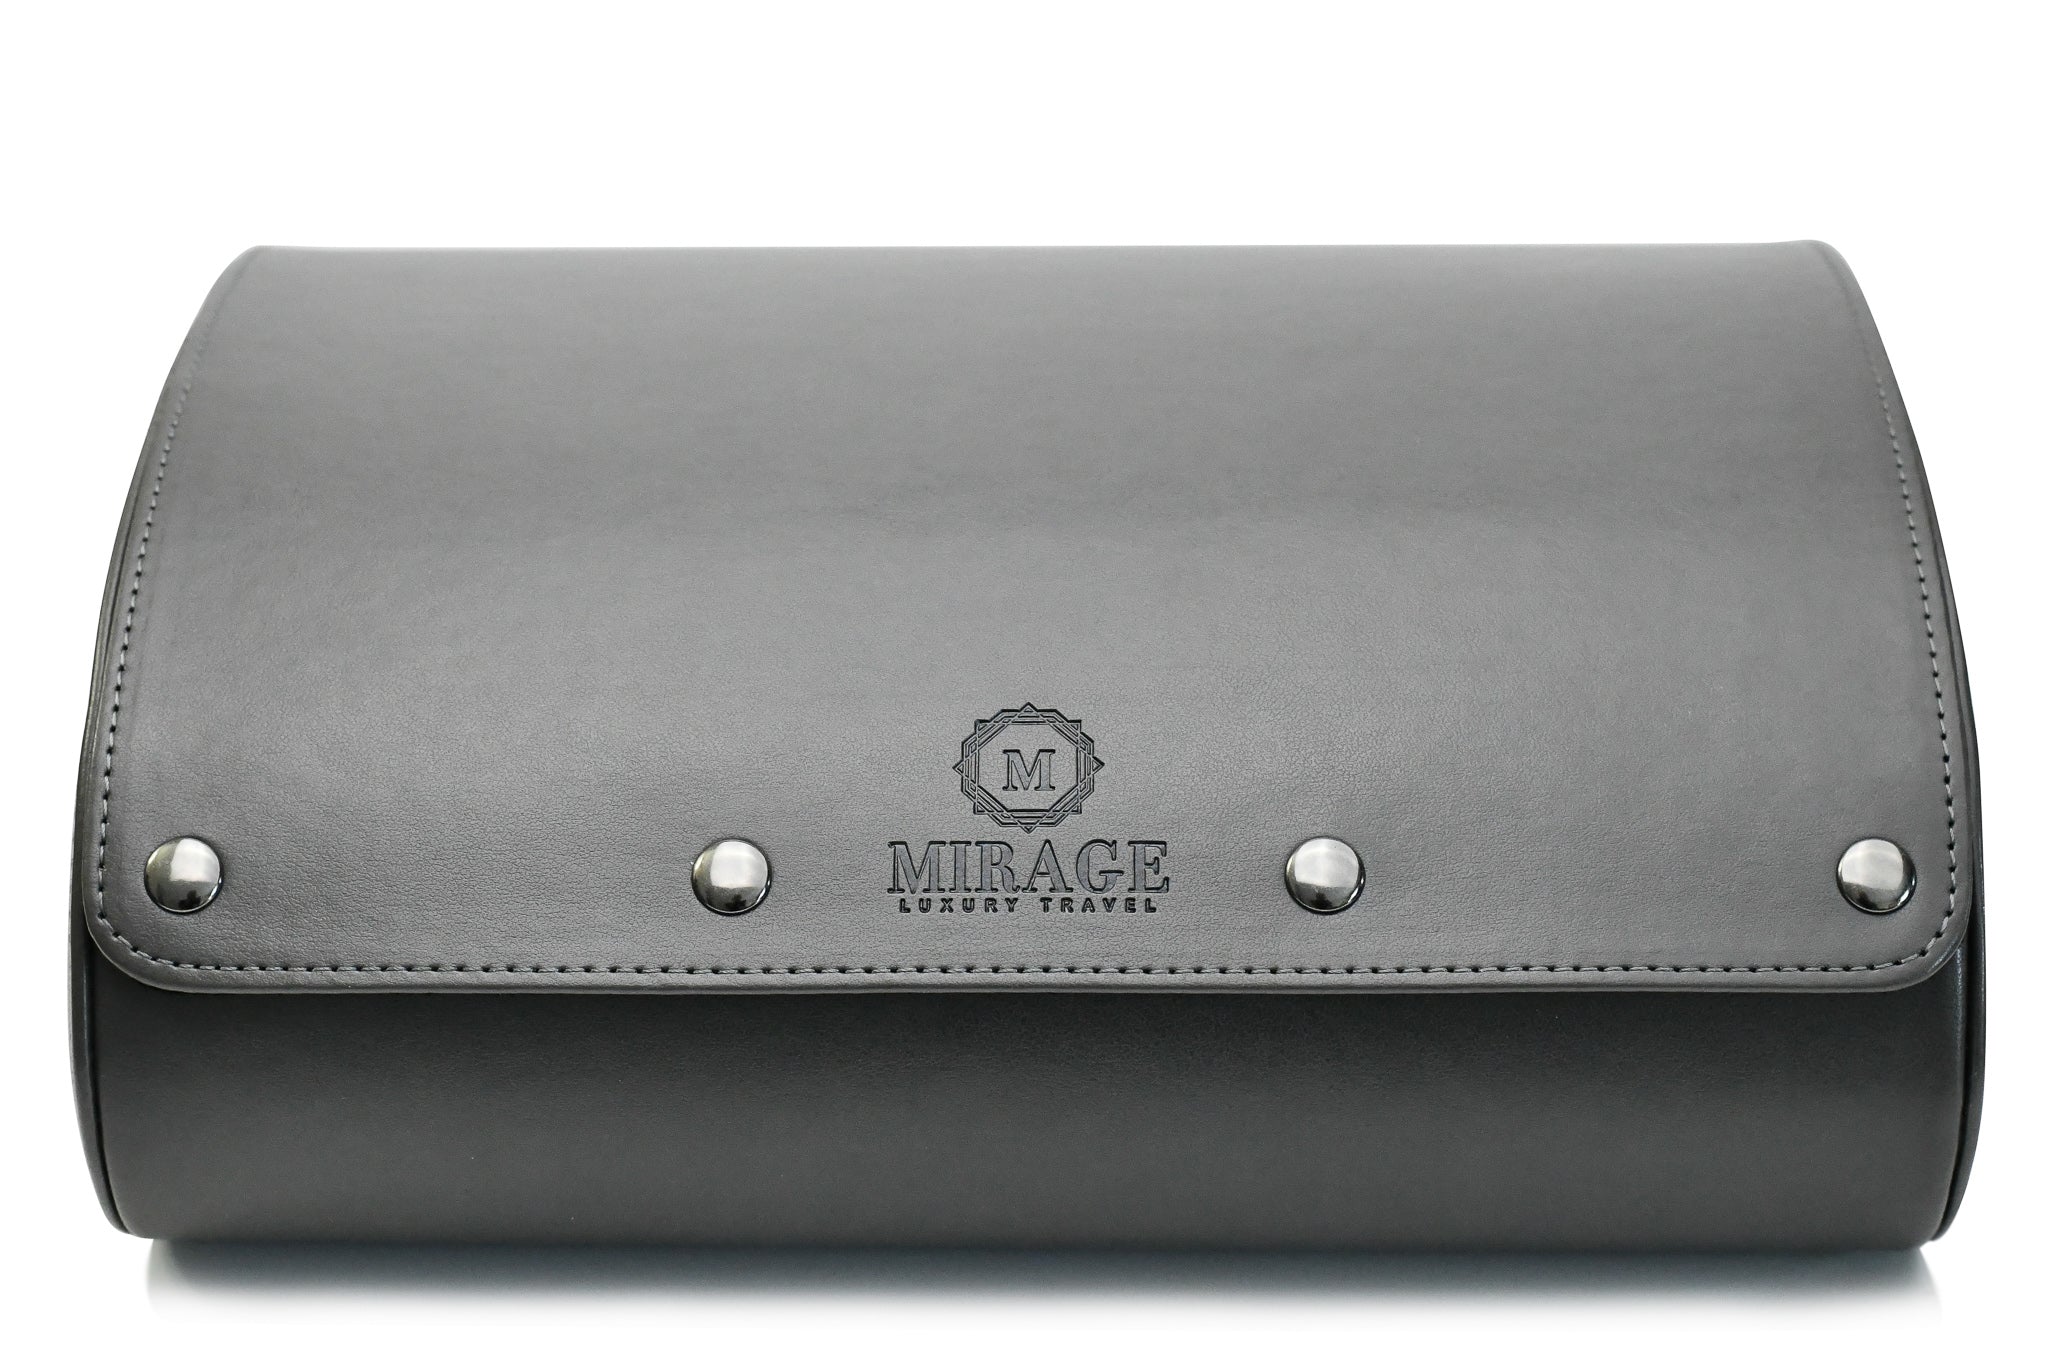 Mirage Luxury Travel Carbon Black Watch Box and Travel Case 